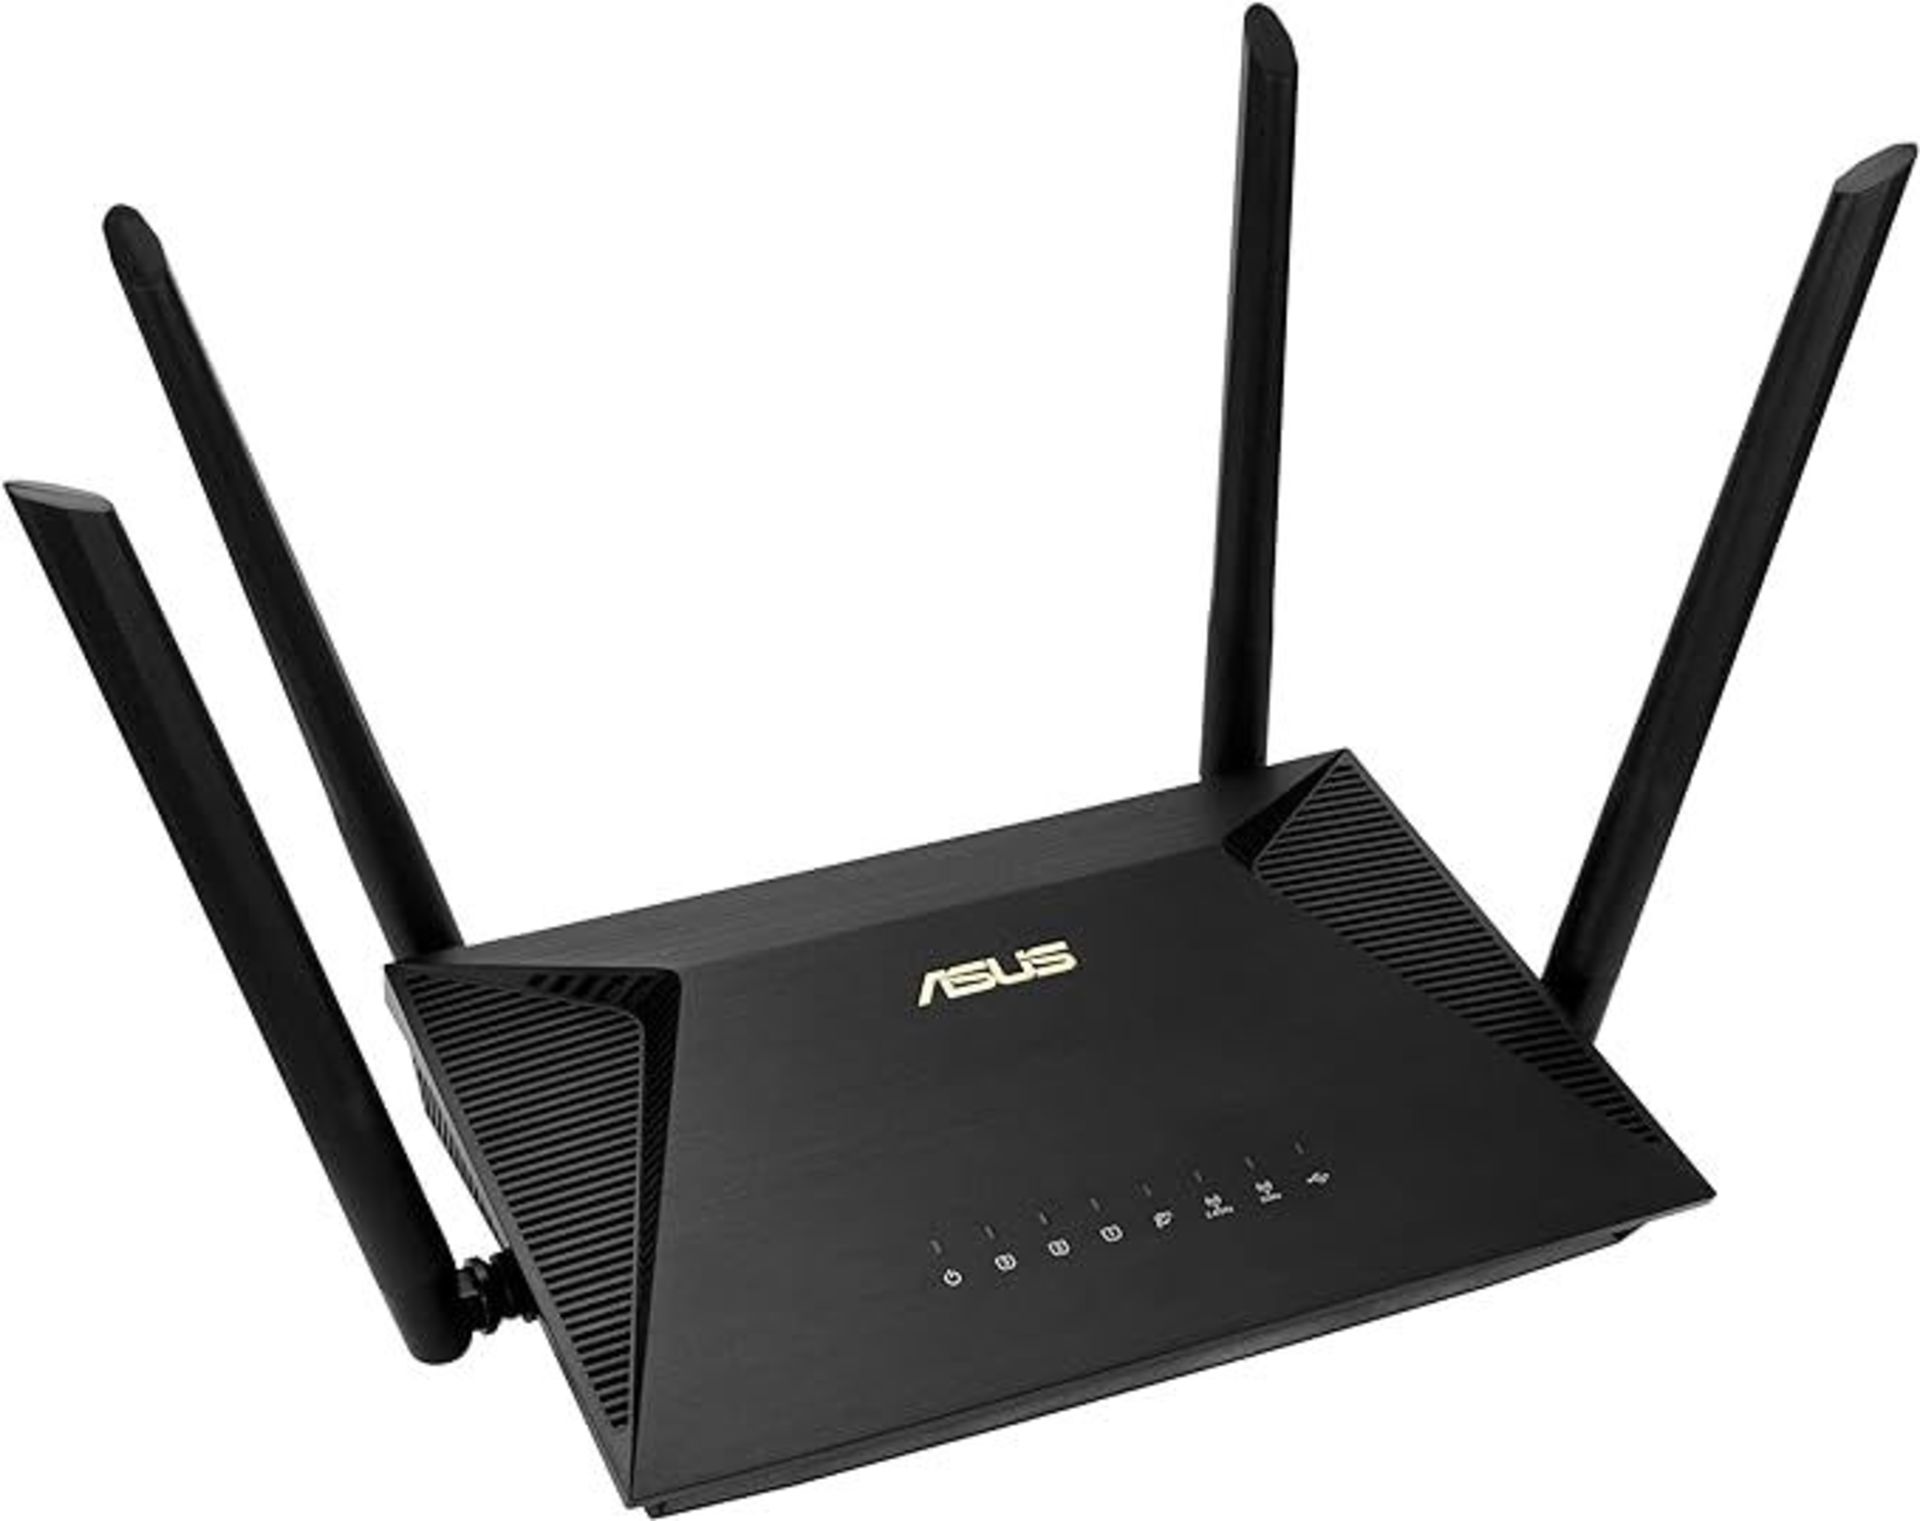 NETGEAR Nighthawk XR1000 WiFi 6 Gaming Router. -P2. RRP £279.99. Step into the future of gaming